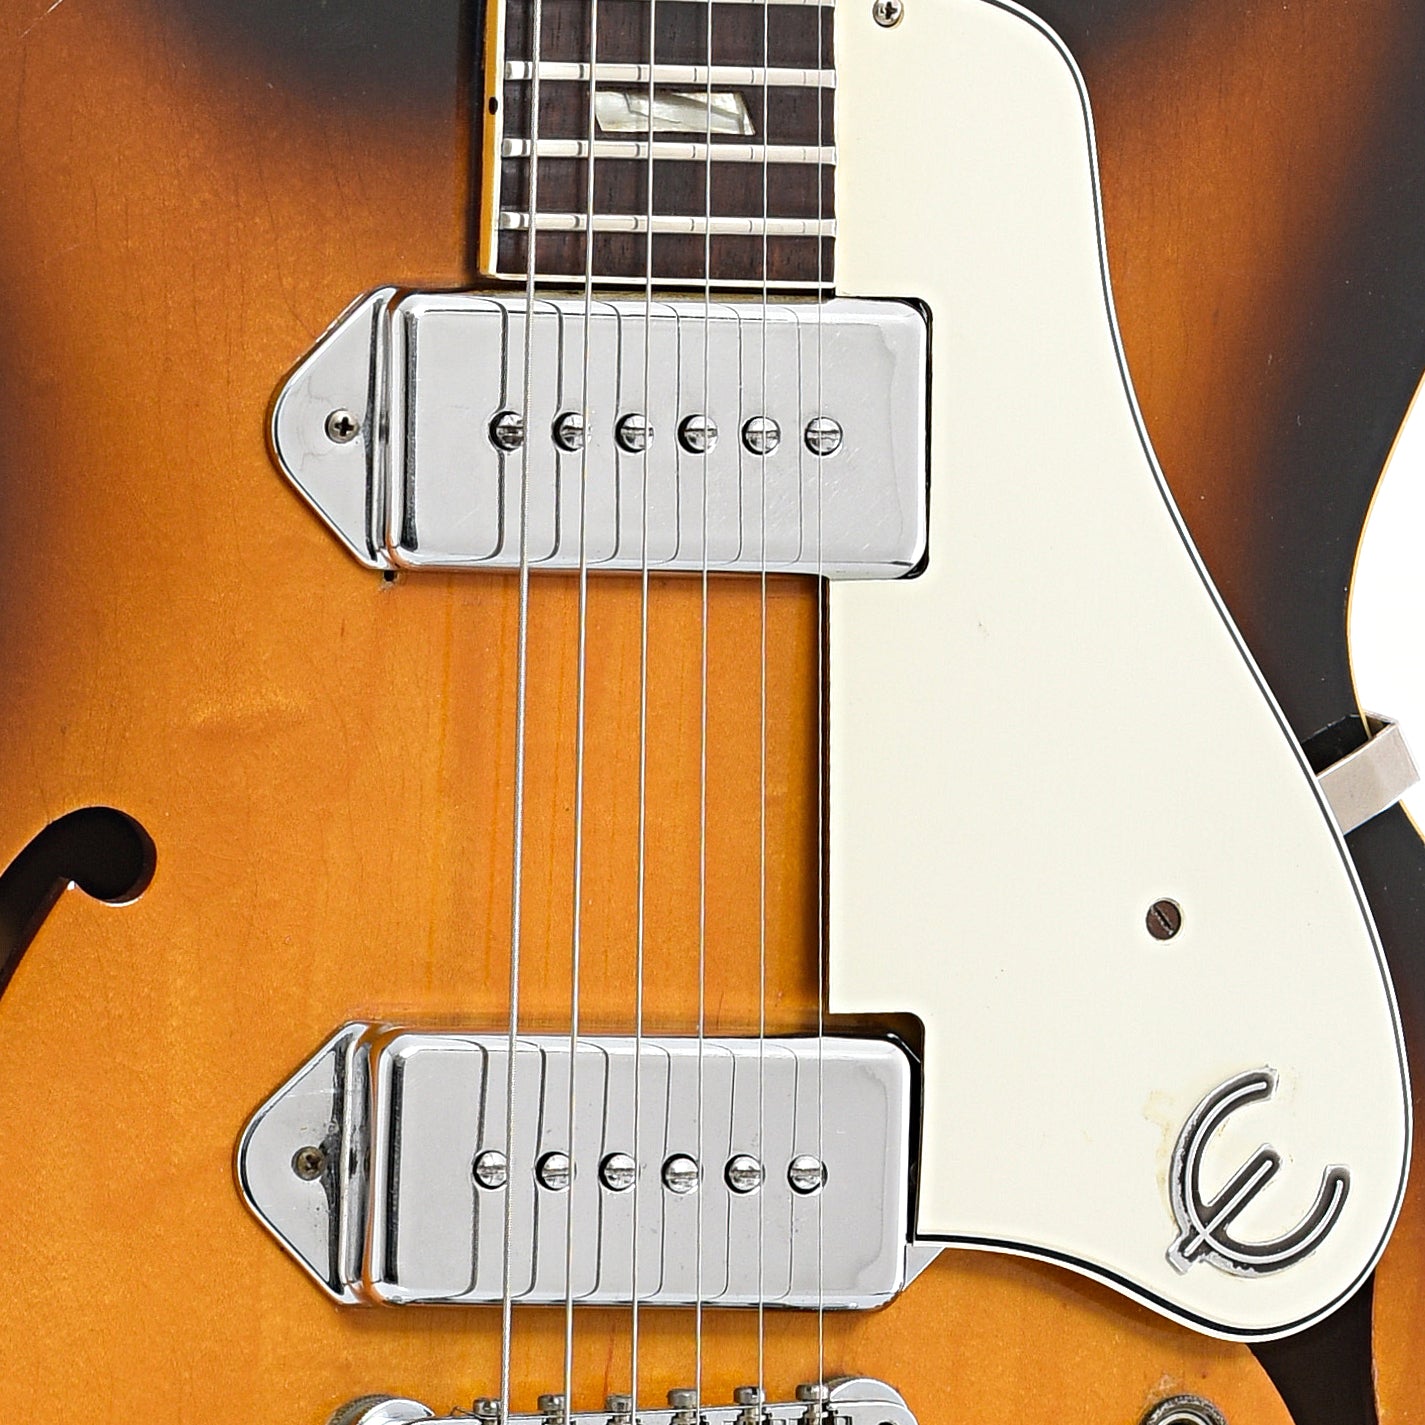 Pickups and pickguard of Epiphone E230TD Casino Hollow Body Electric Guitar (c.1966-69)